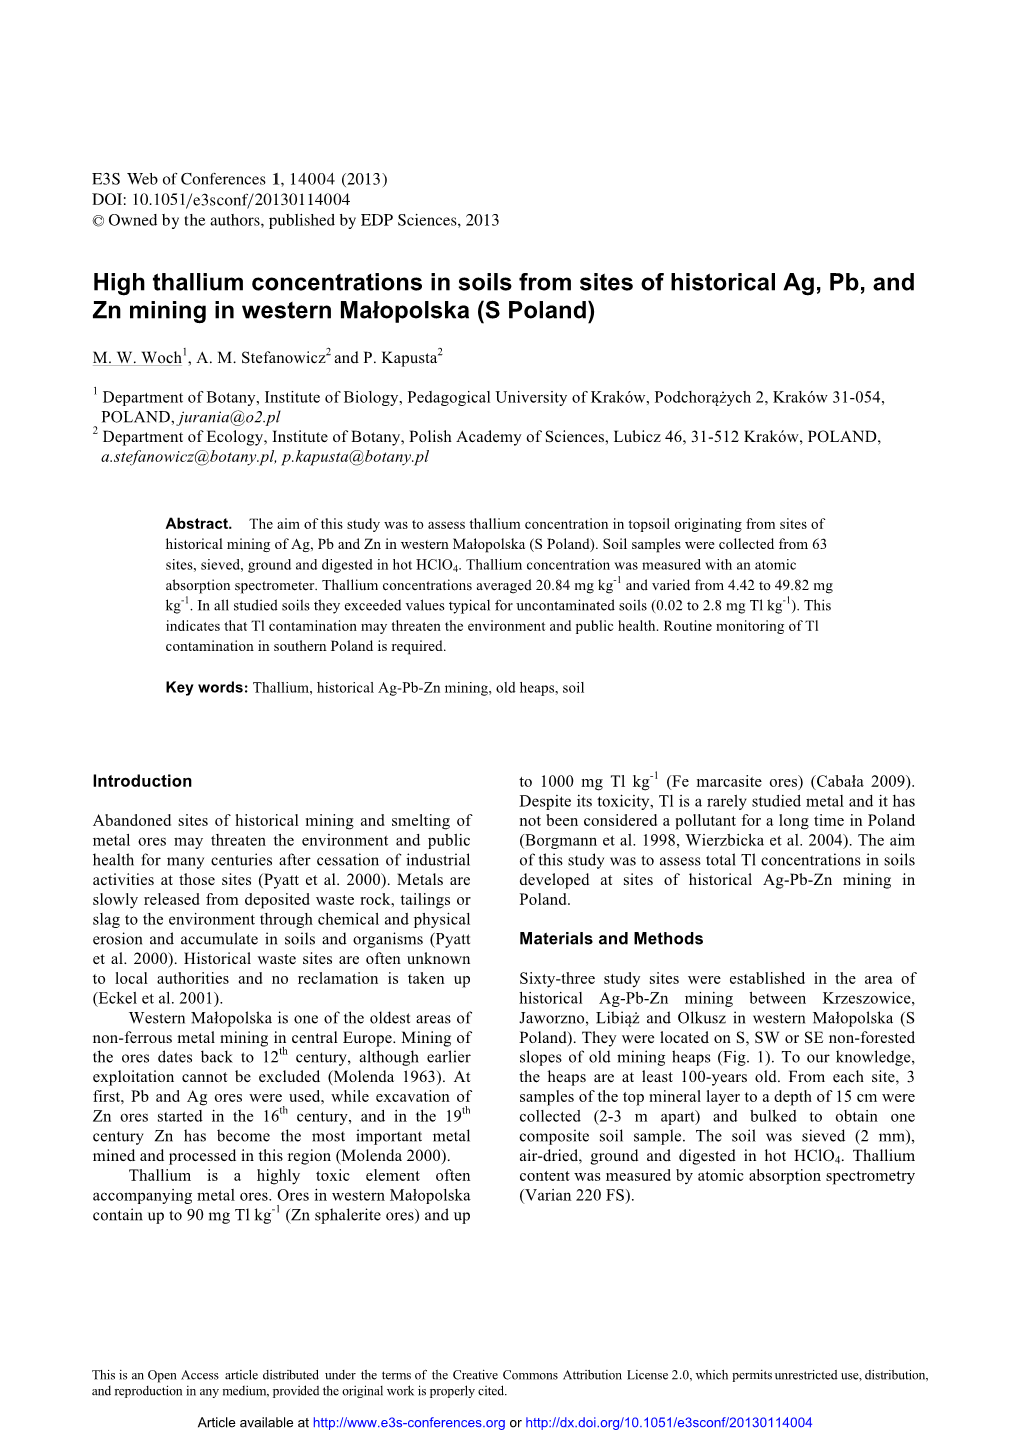 High Thallium Concentrations in Soils from Sites of Historical Ag, Pb, and Zn Mining in Western Małopolska \(S Poland\)